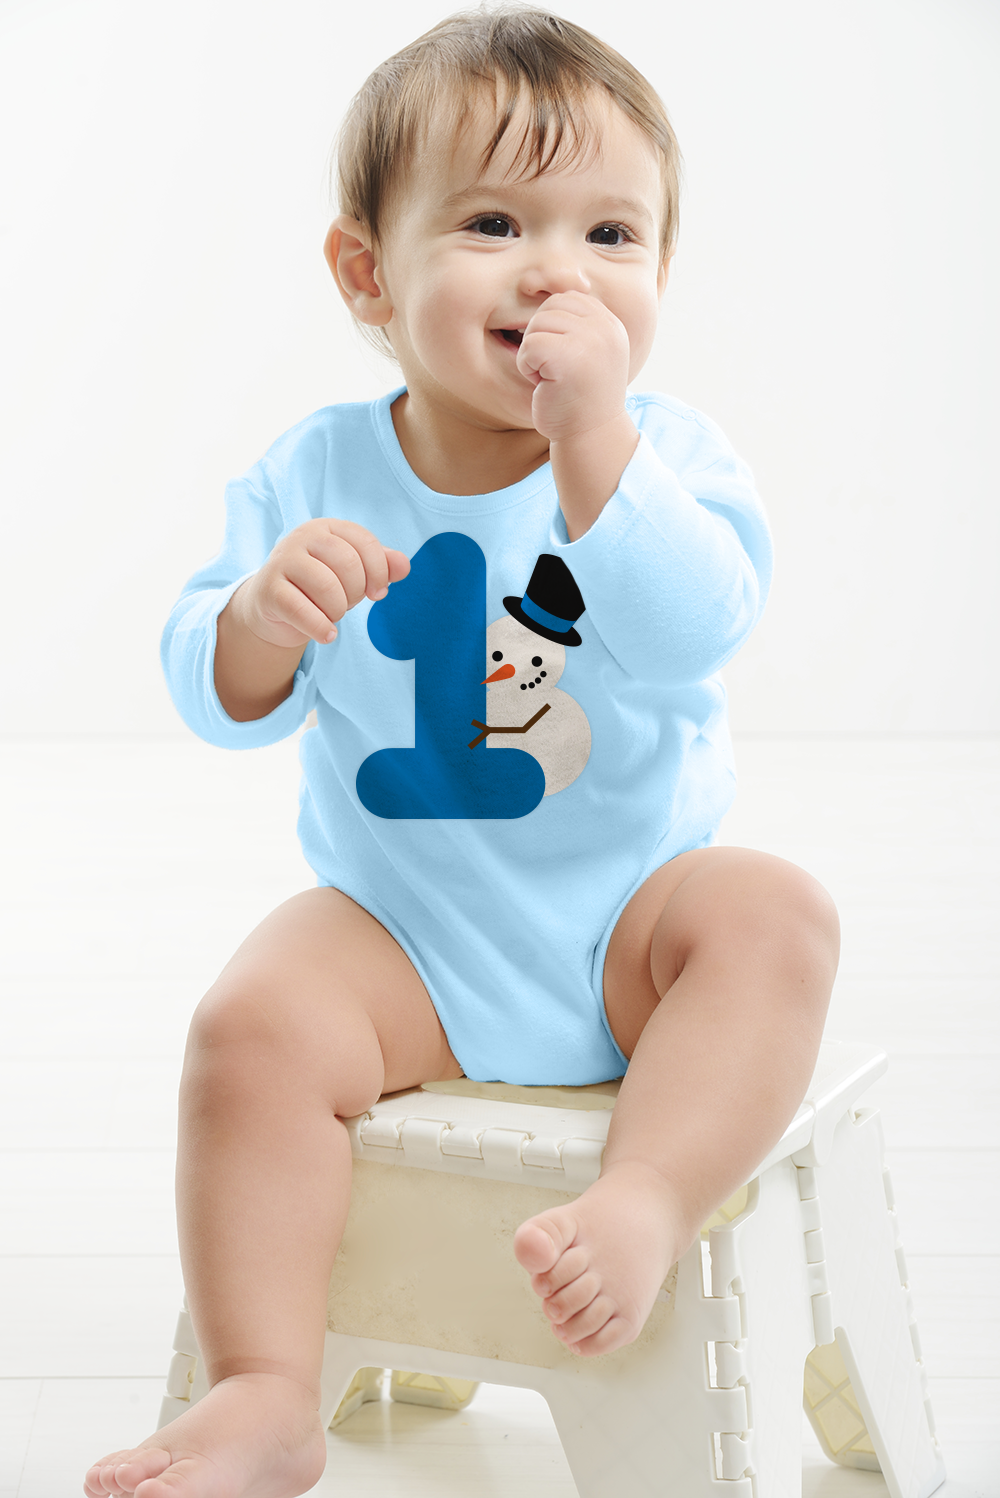 A white baby sucks his thumb. He has a blue onesie with a large 1 and a snowman behind the number.